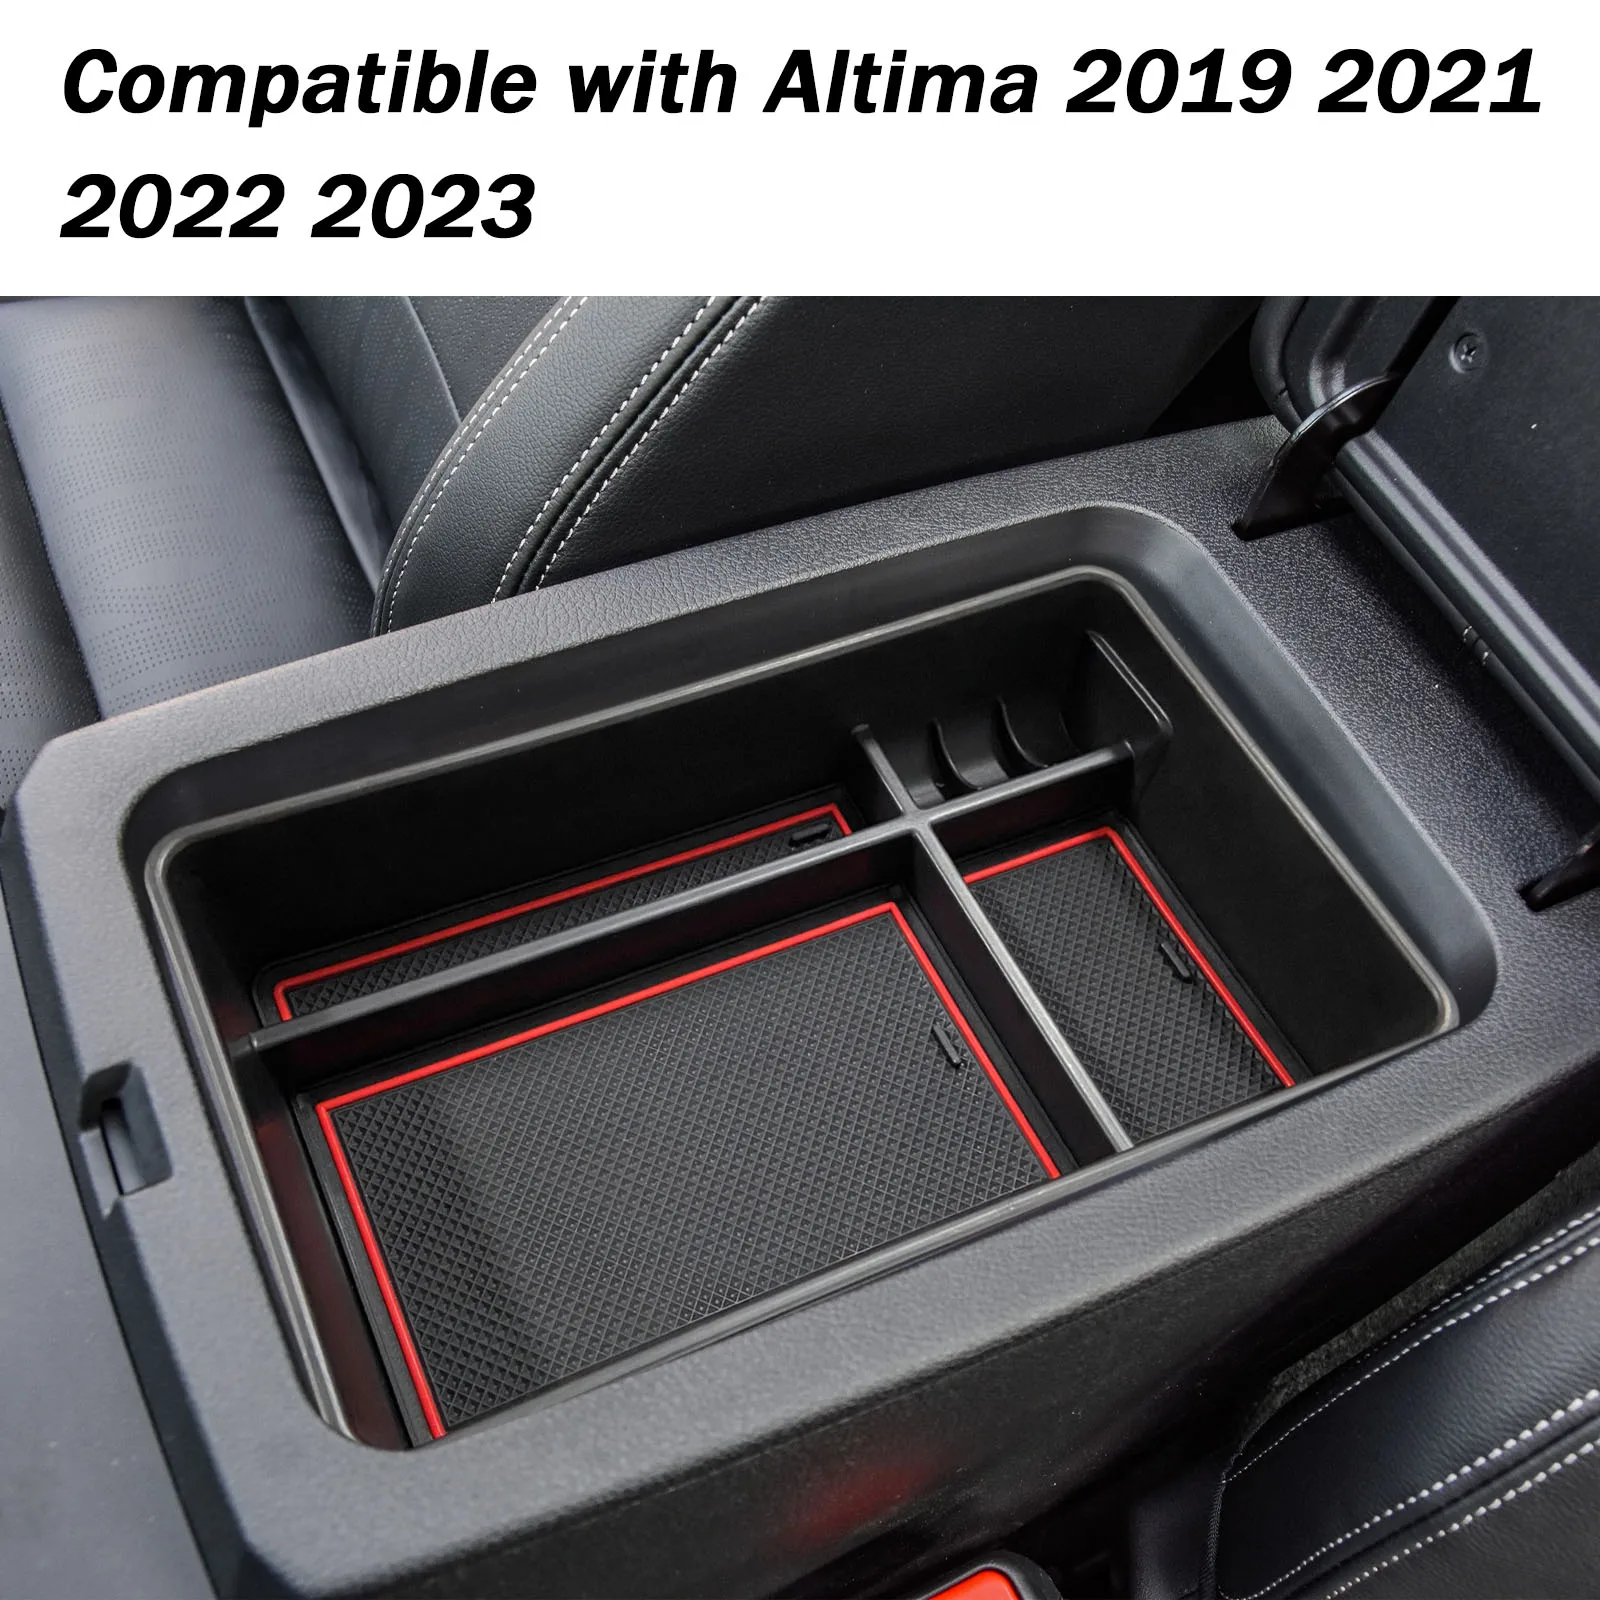 Center Console Tray Organizer For Nissan Altima 2019 2020 2021 2022 2023 Accessories Container Stowing Glove Box Pallet Holder cloudfireglory blue box center console organizer holder abs accessories for toyota rav4 2019 2020